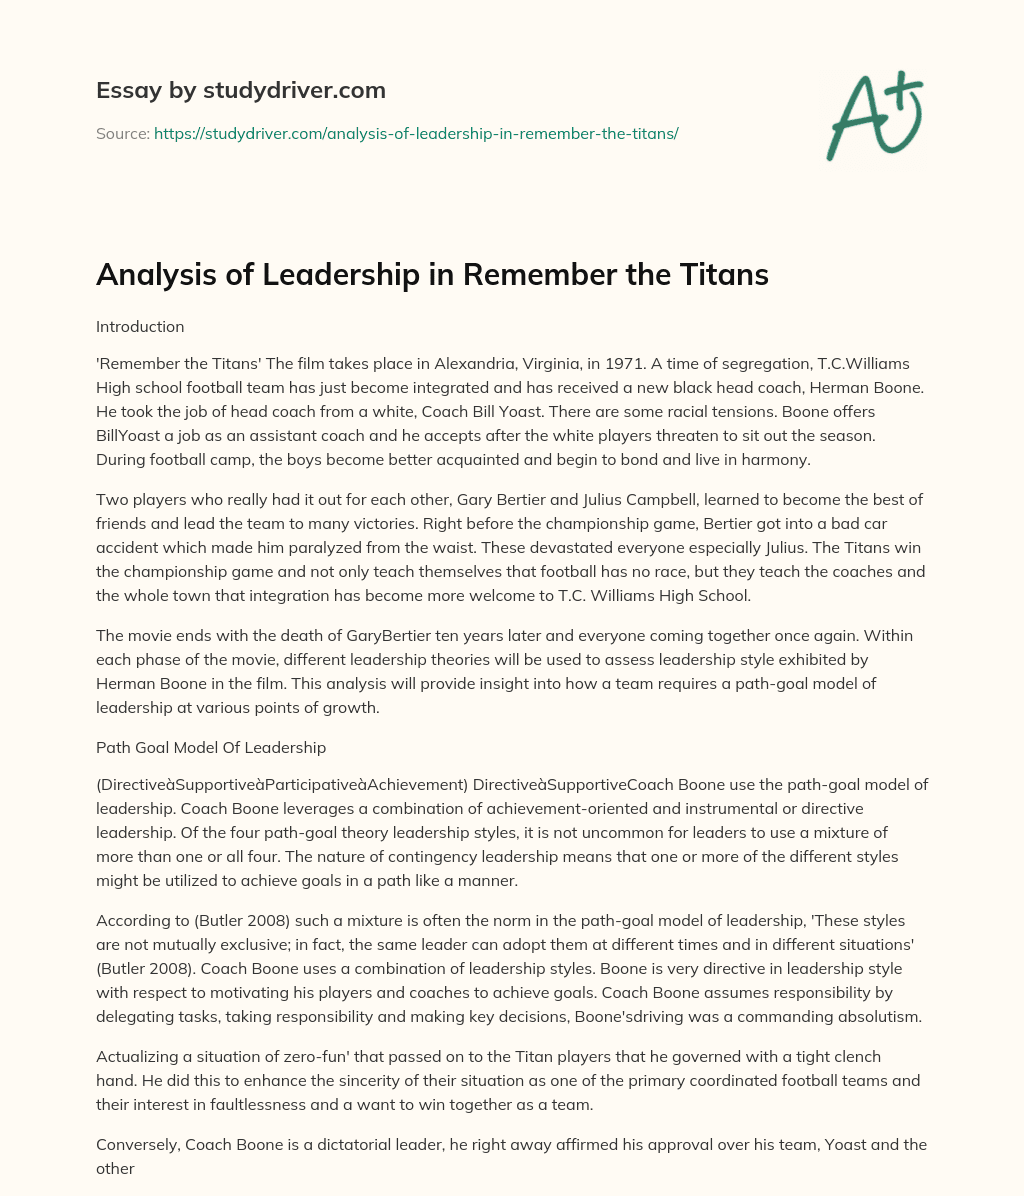 Analysis of Leadership in Remember the Titans essay